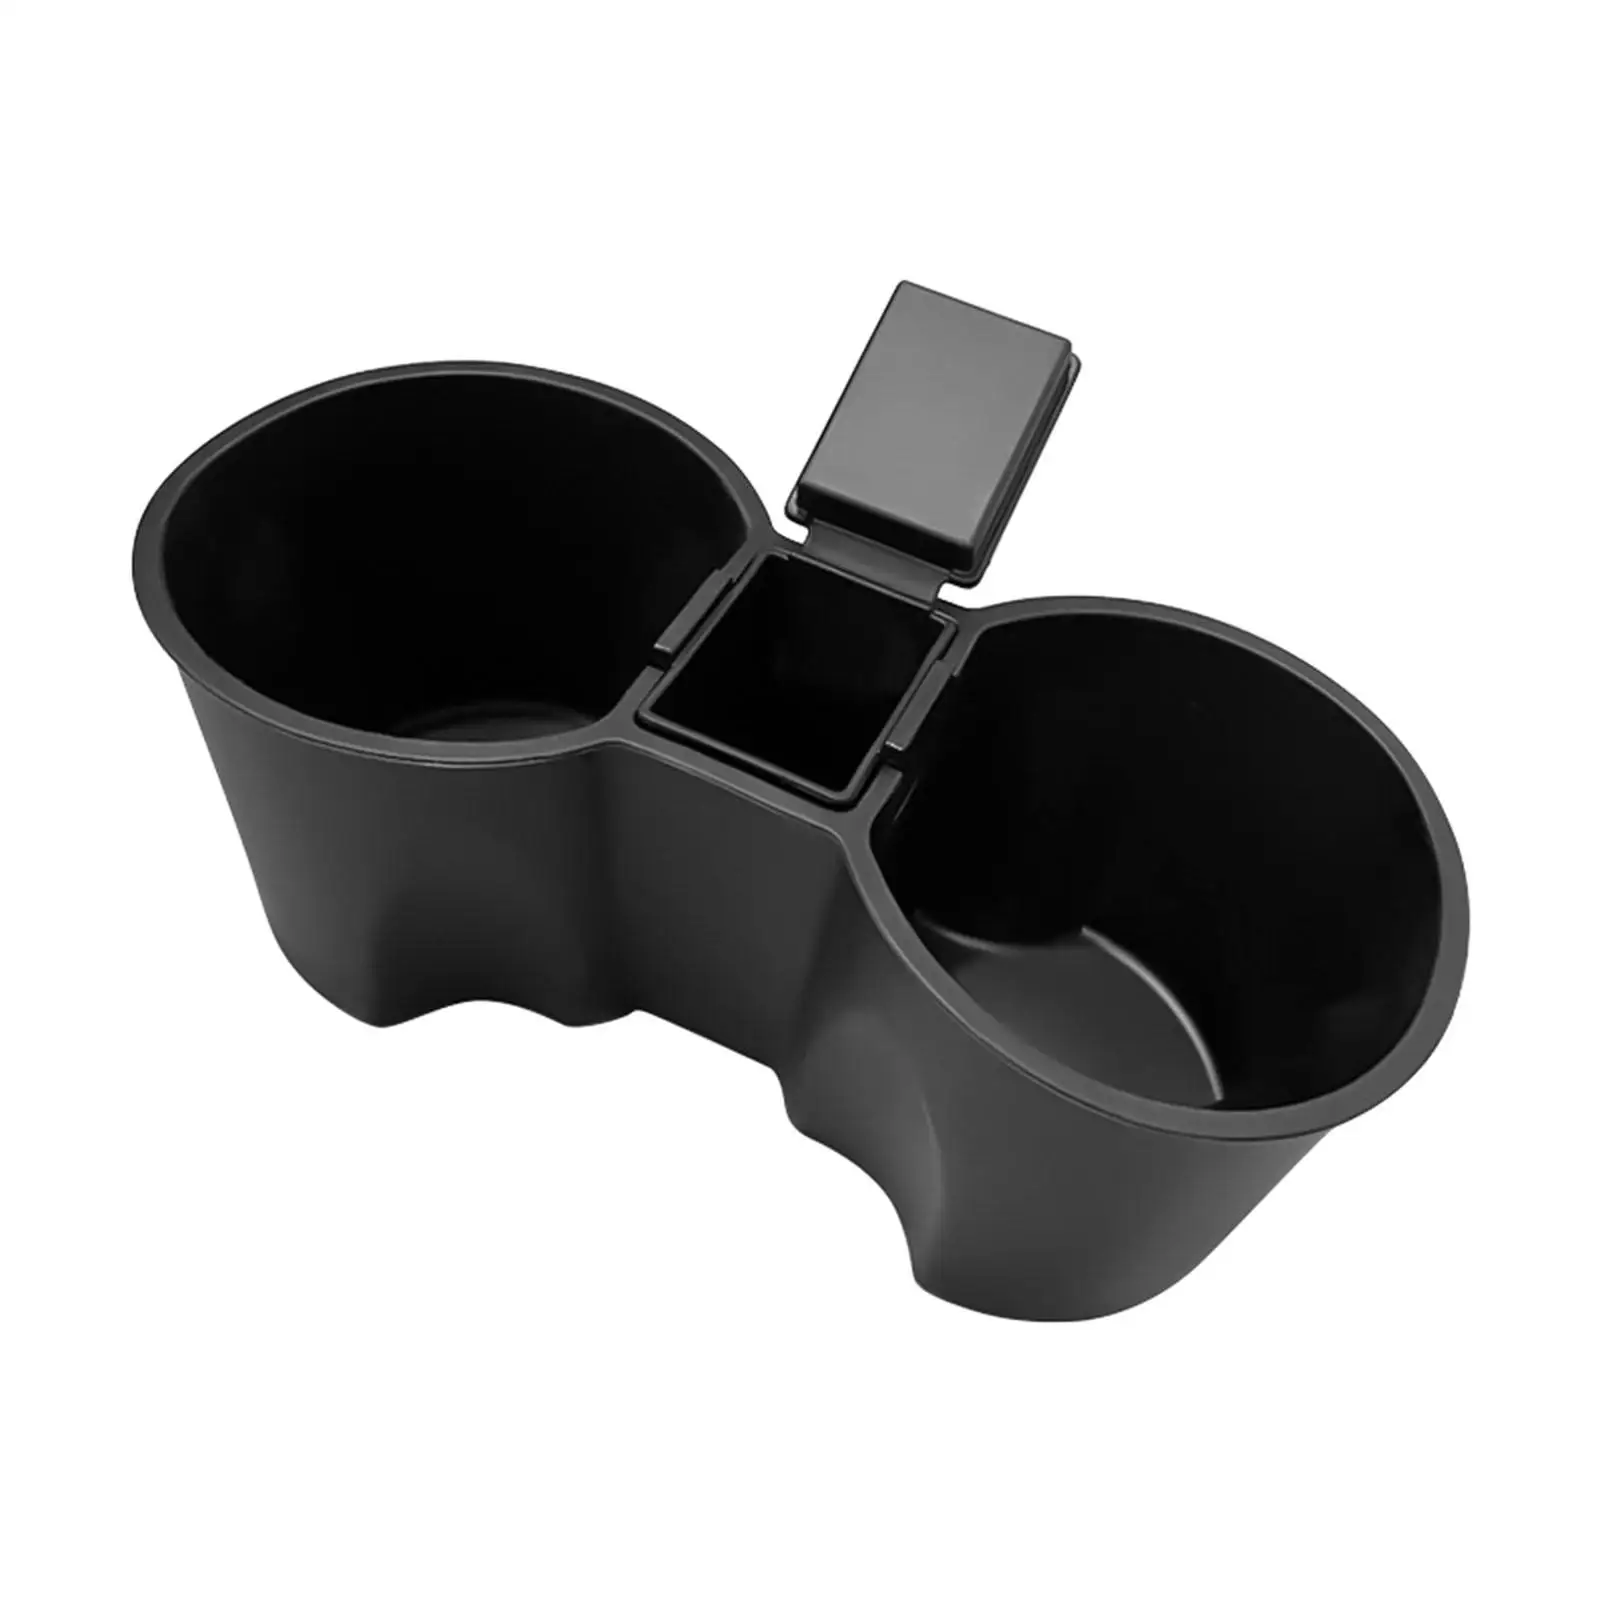 Automotive Water Cup Holder Silicone Interior Center Console Drinks Accessories Coffee Insert Bottle Cover Fits for  Model Y